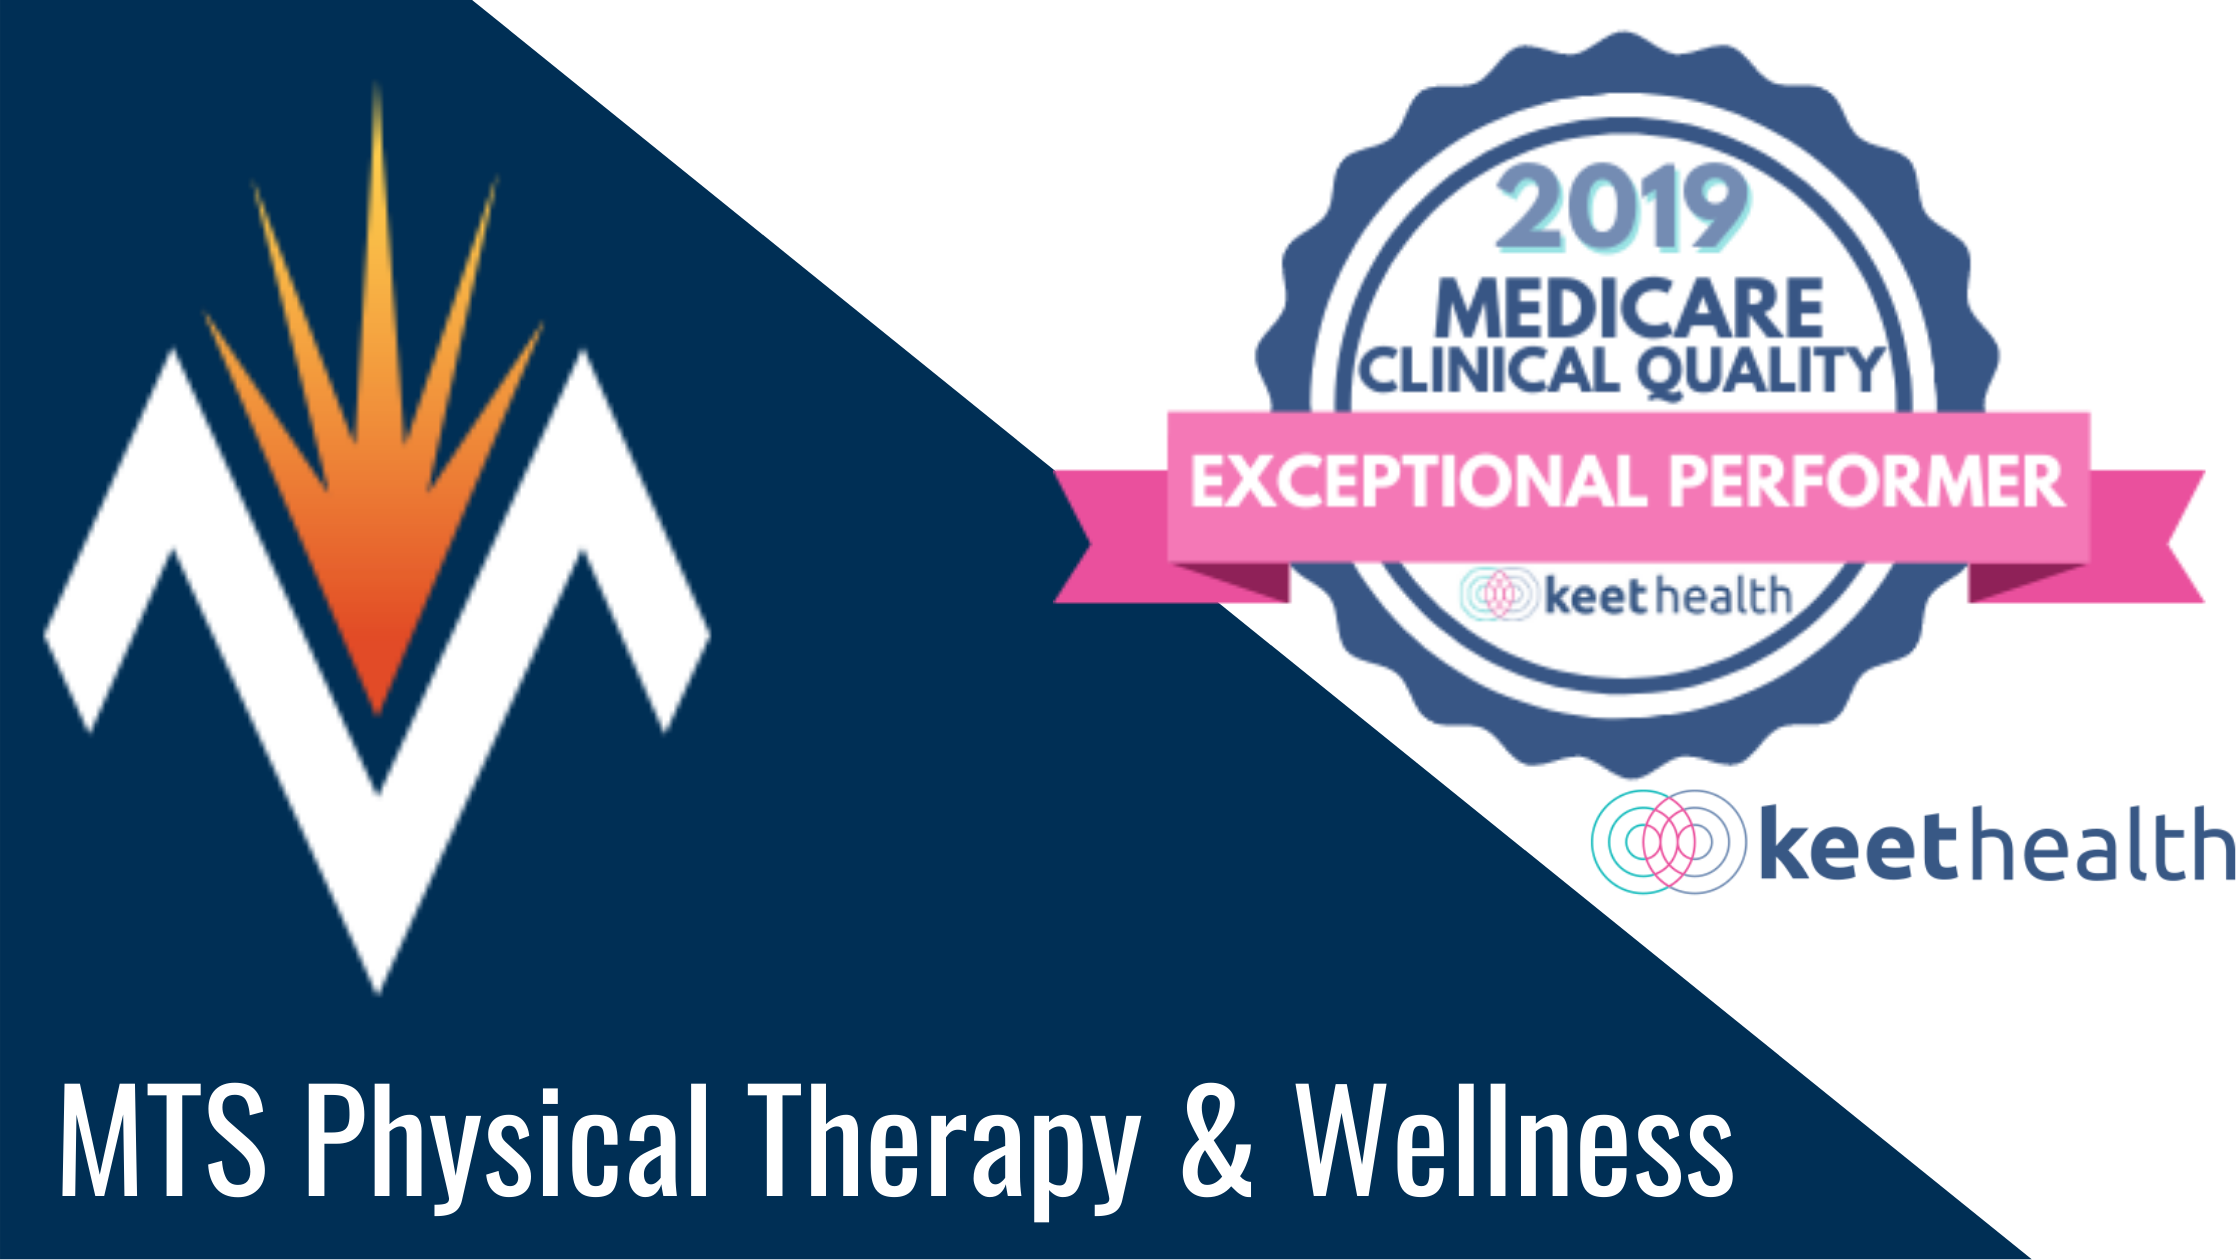 MTS Therapists Named Exceptional Performers